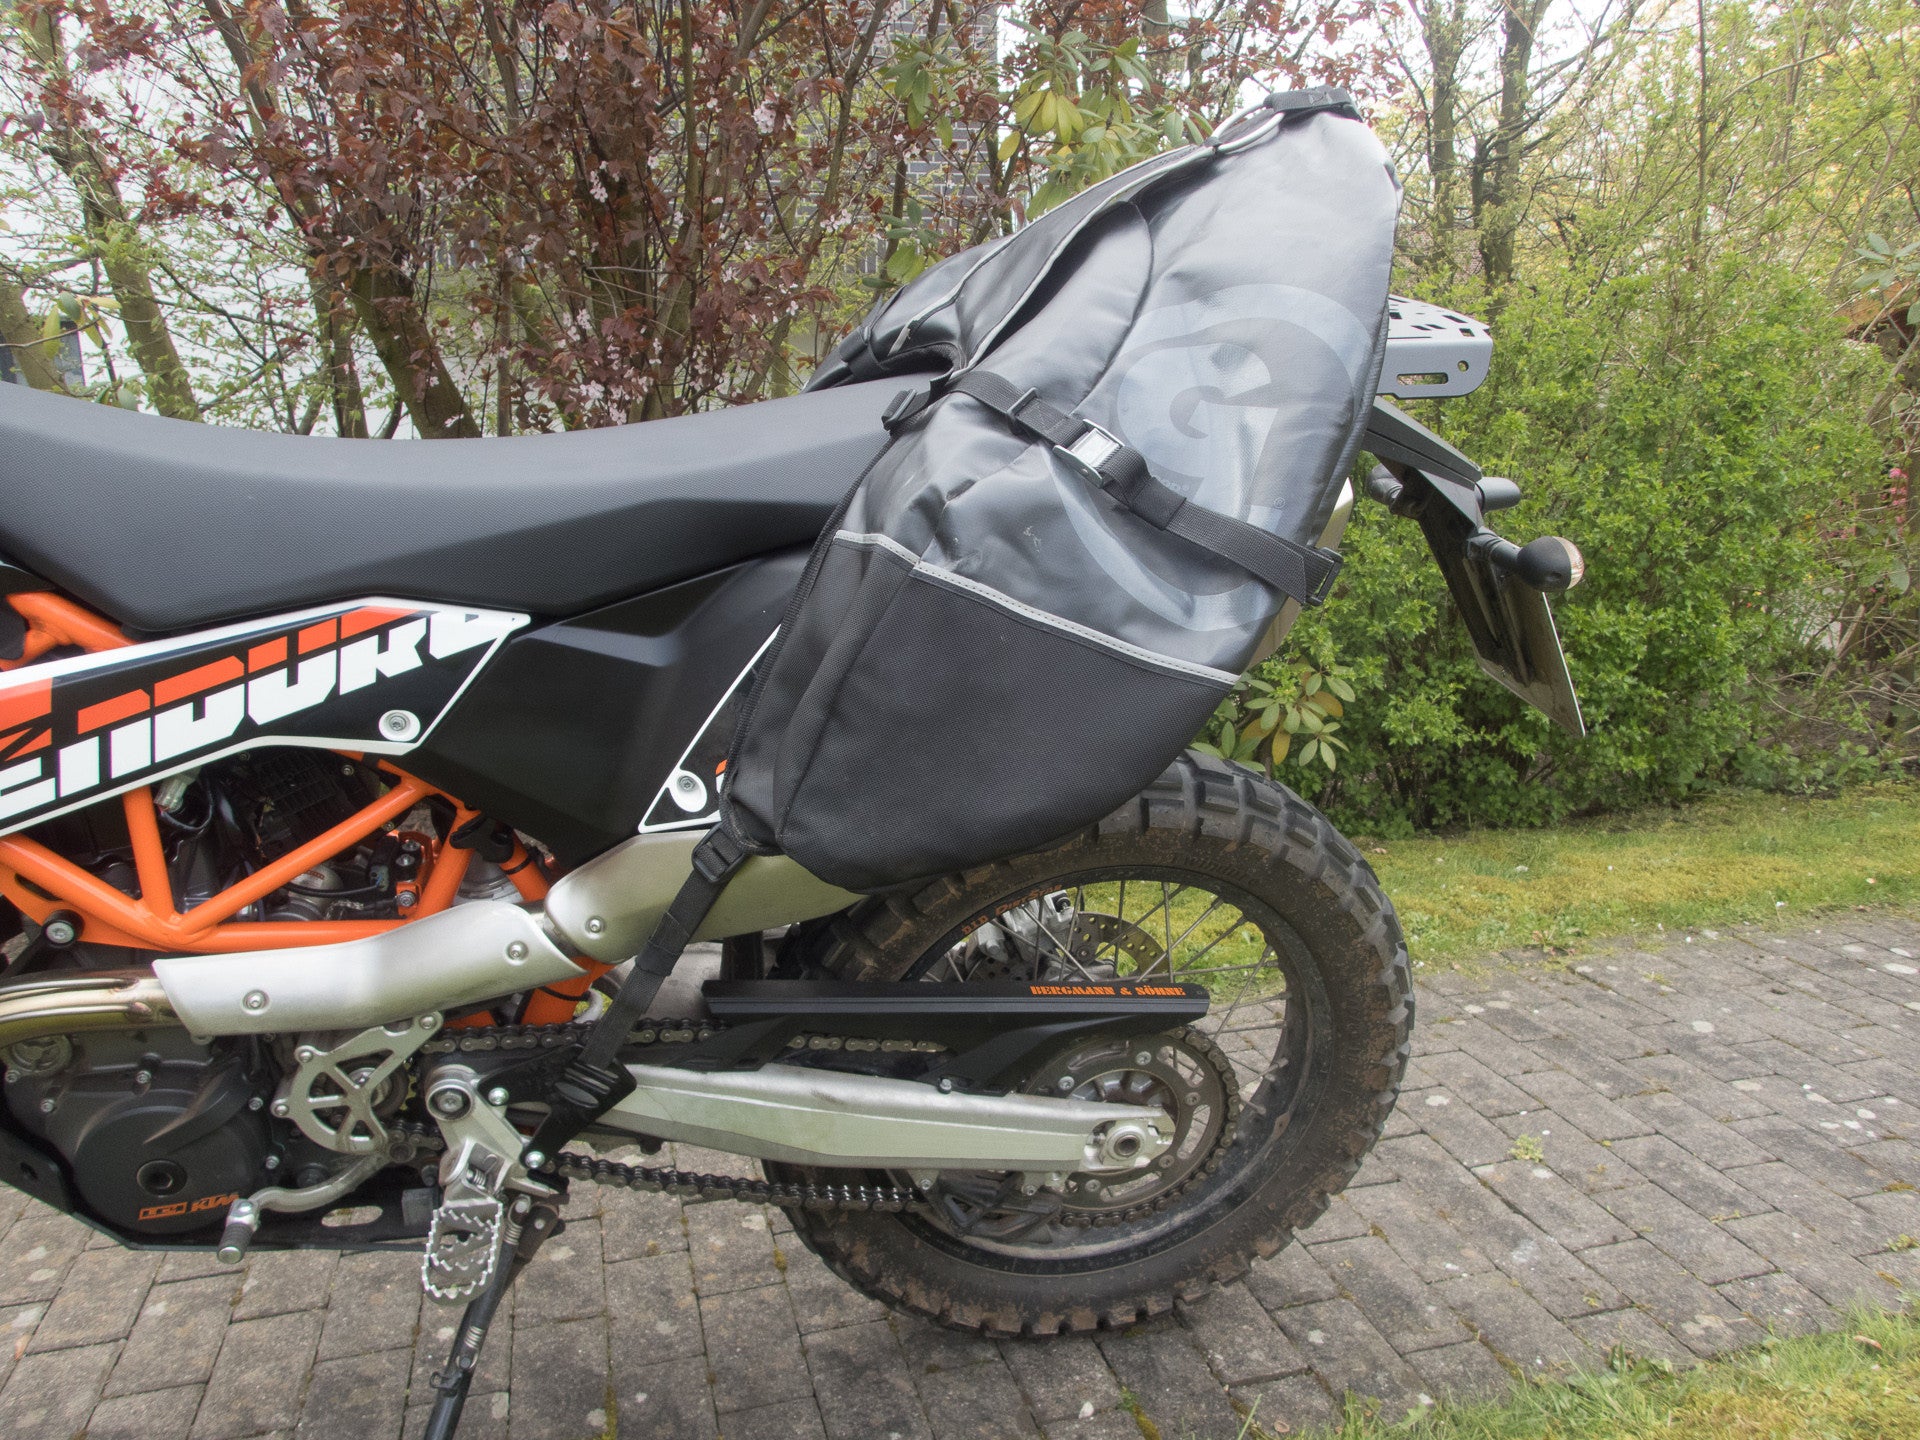 More pictures of Giant Loop Coyote and Perun moto KTM 690 Enduro Luggage rack SD and Heel guards